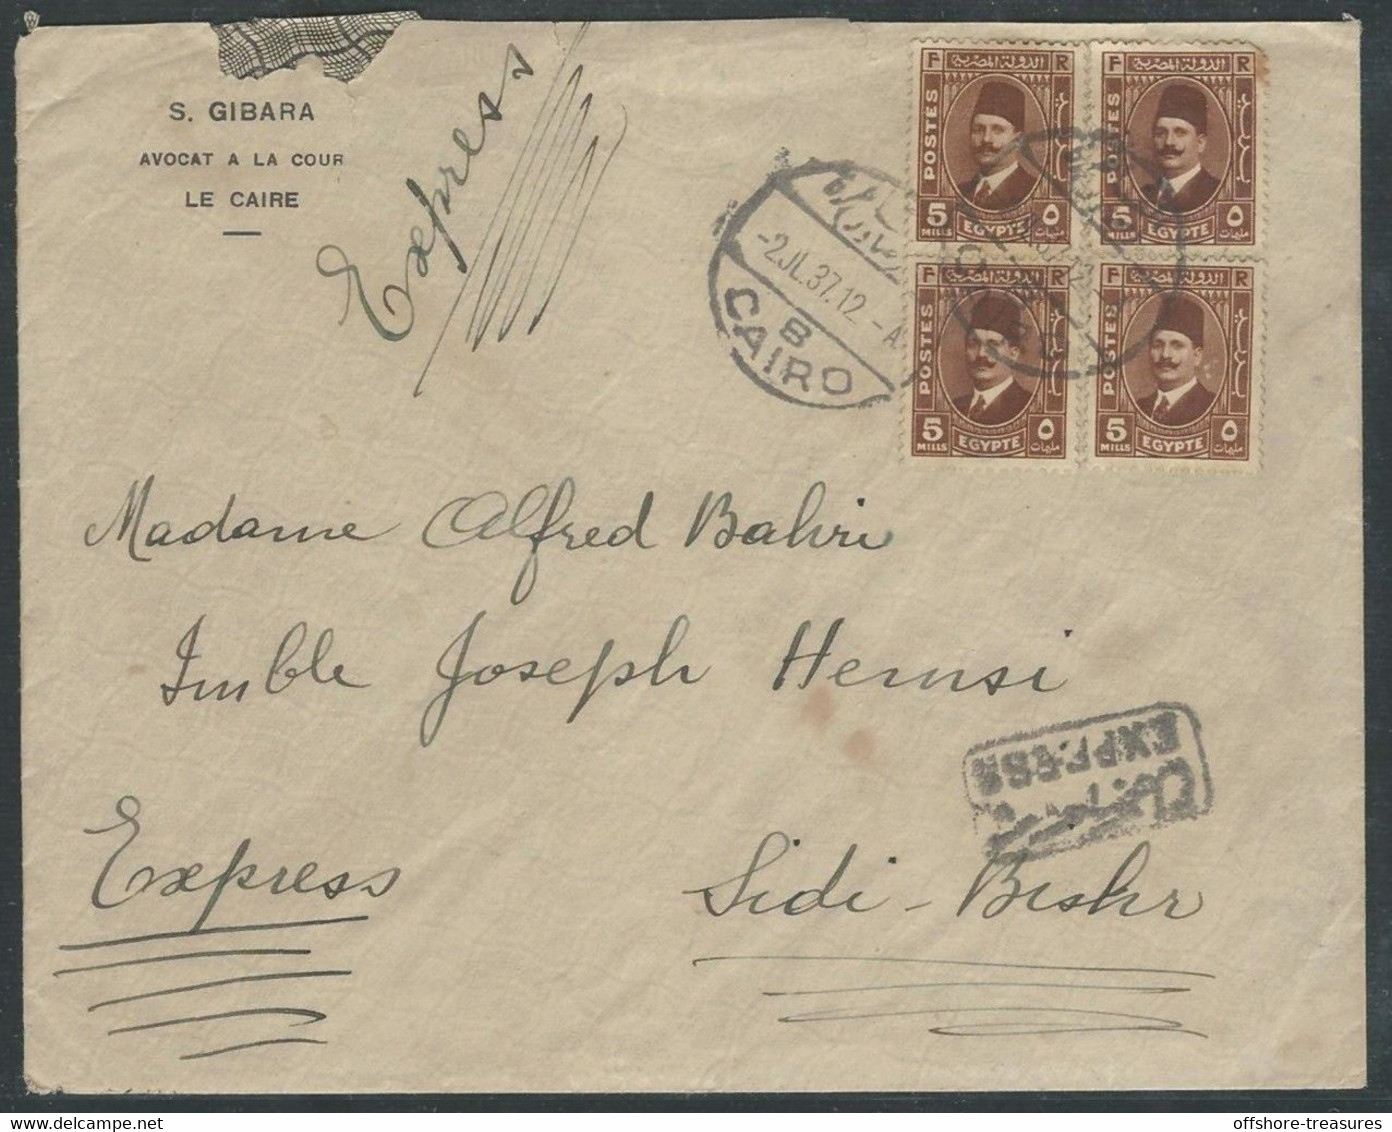 EGYPT 1937 Express Cover 20 Mills King Fuad / Fouad Stamp Usage Rare Example /Not Motorcycle - Cairo To Alexandria - 1915-1921 Protettorato Britannico